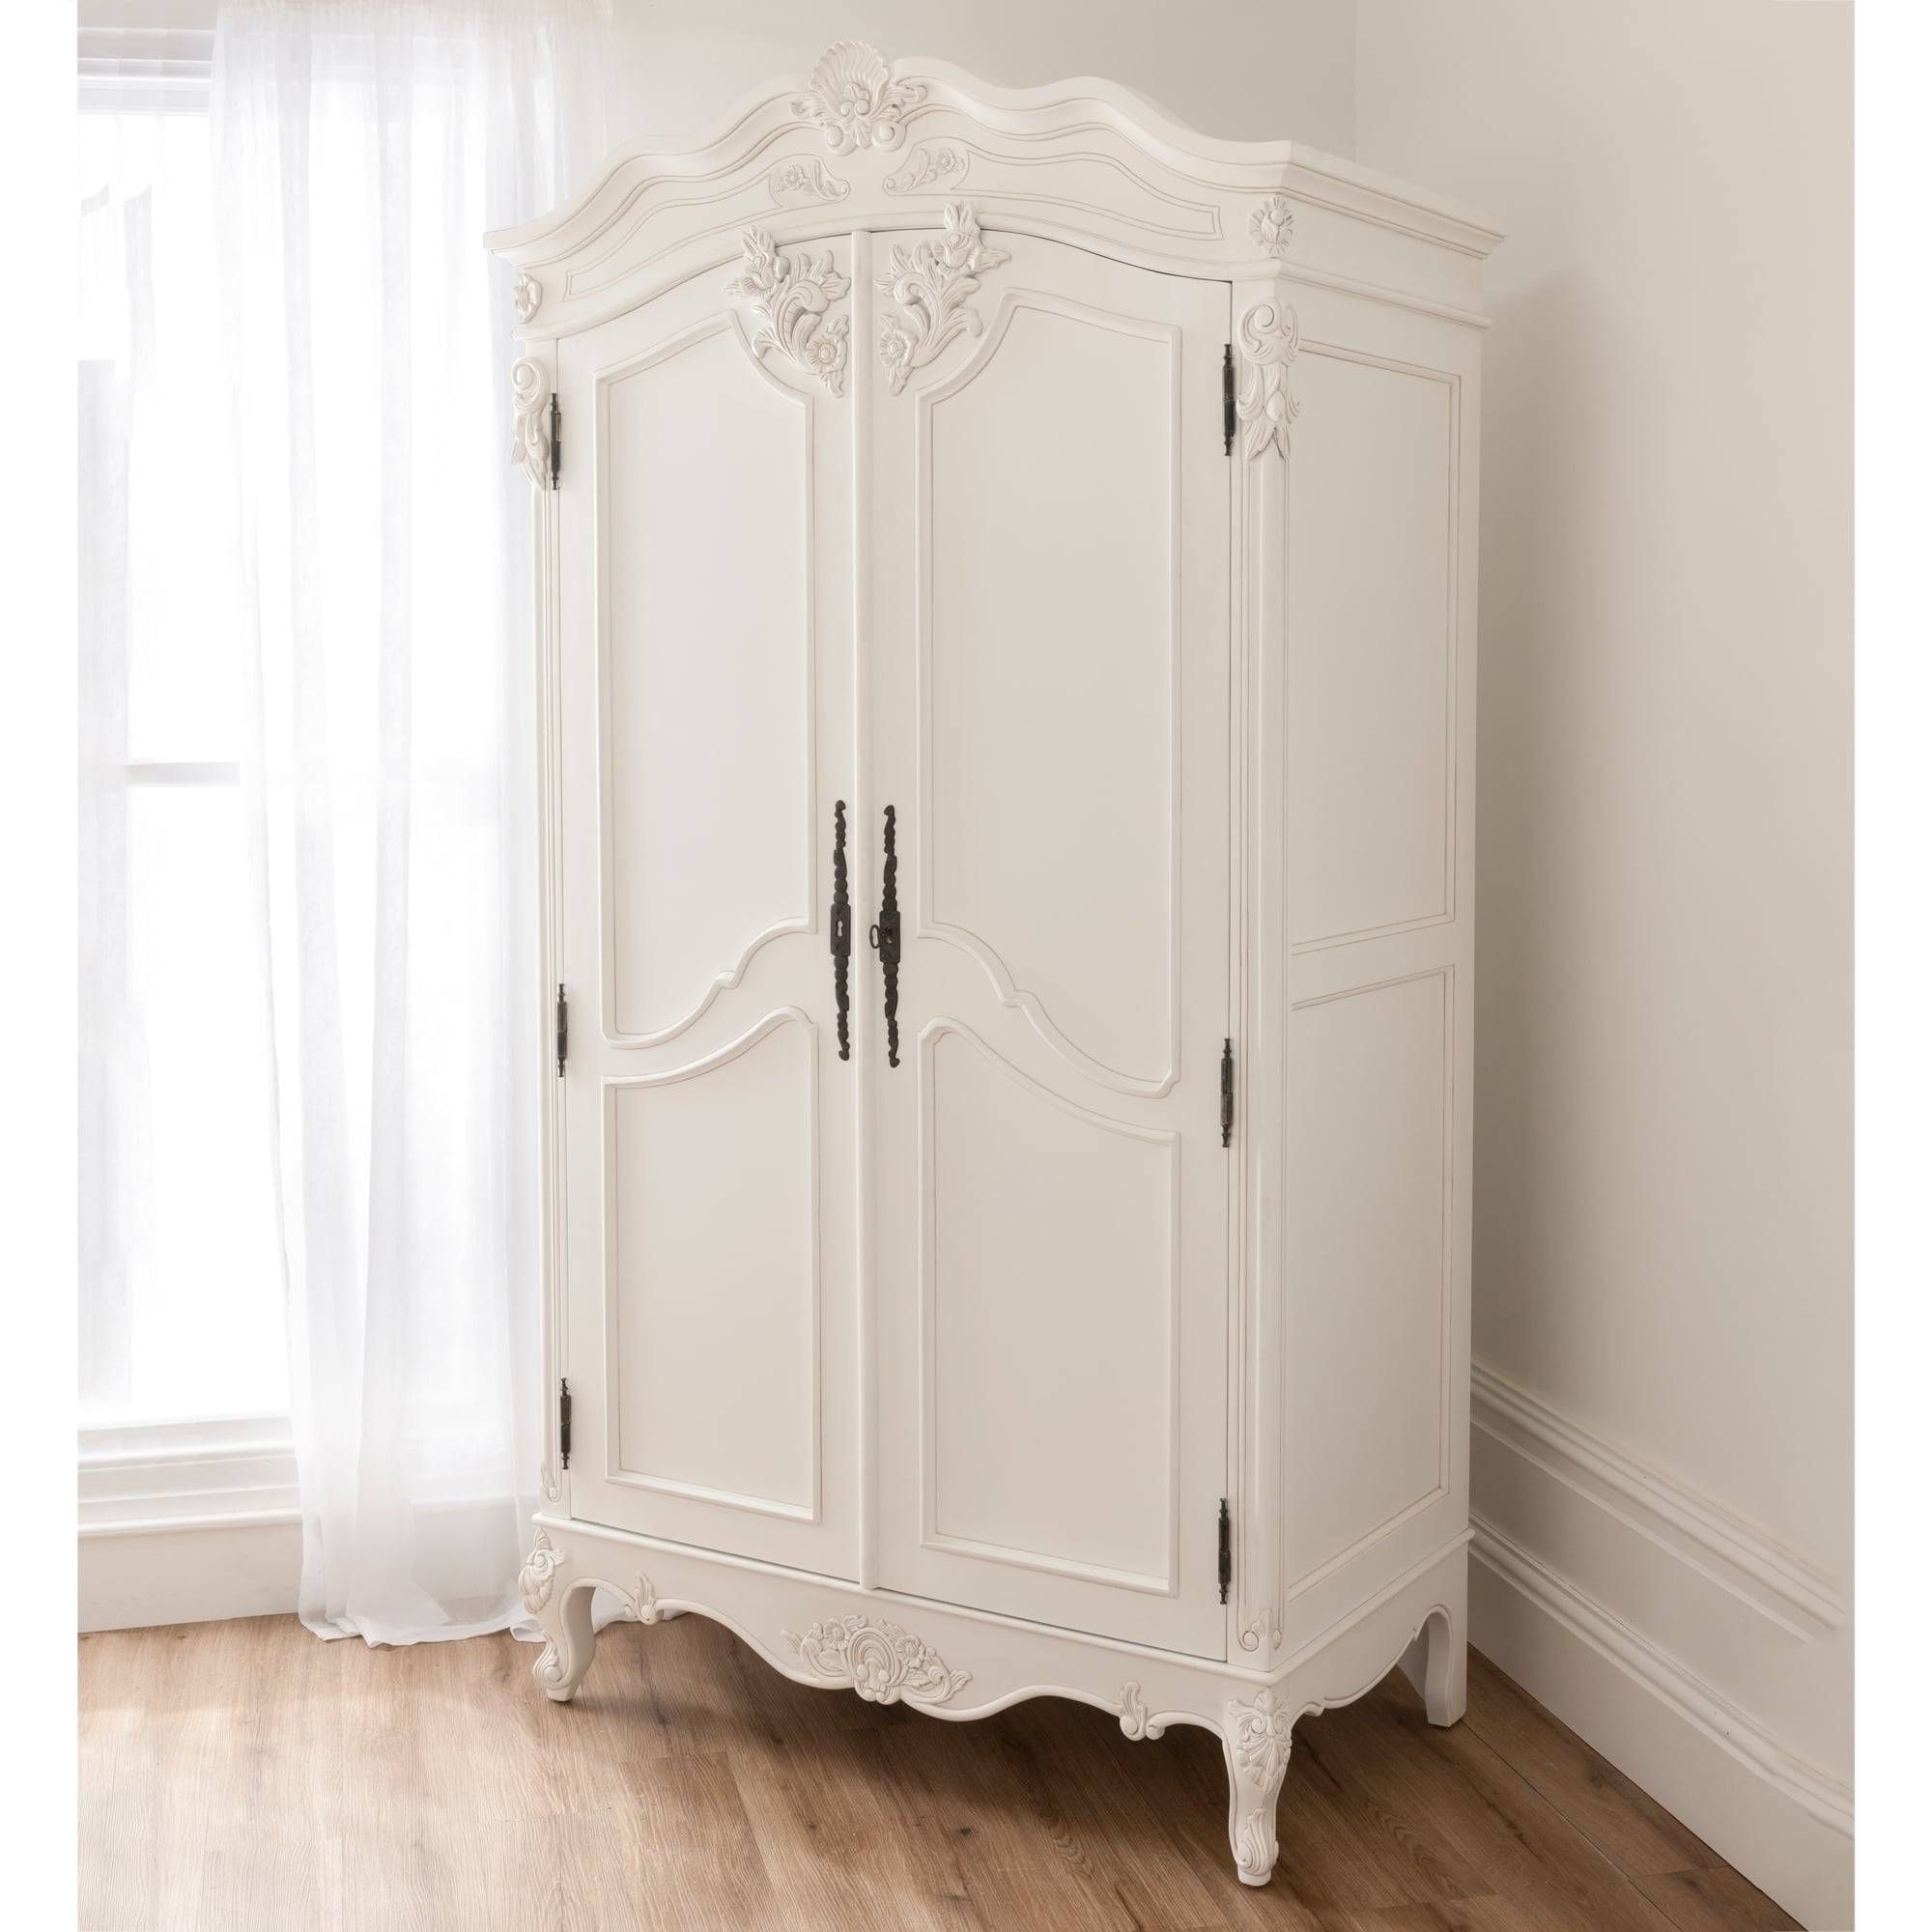 Baroque Antique French Wardrobe Is Available Online From Intended For Baroque Wardrobes (View 2 of 15)